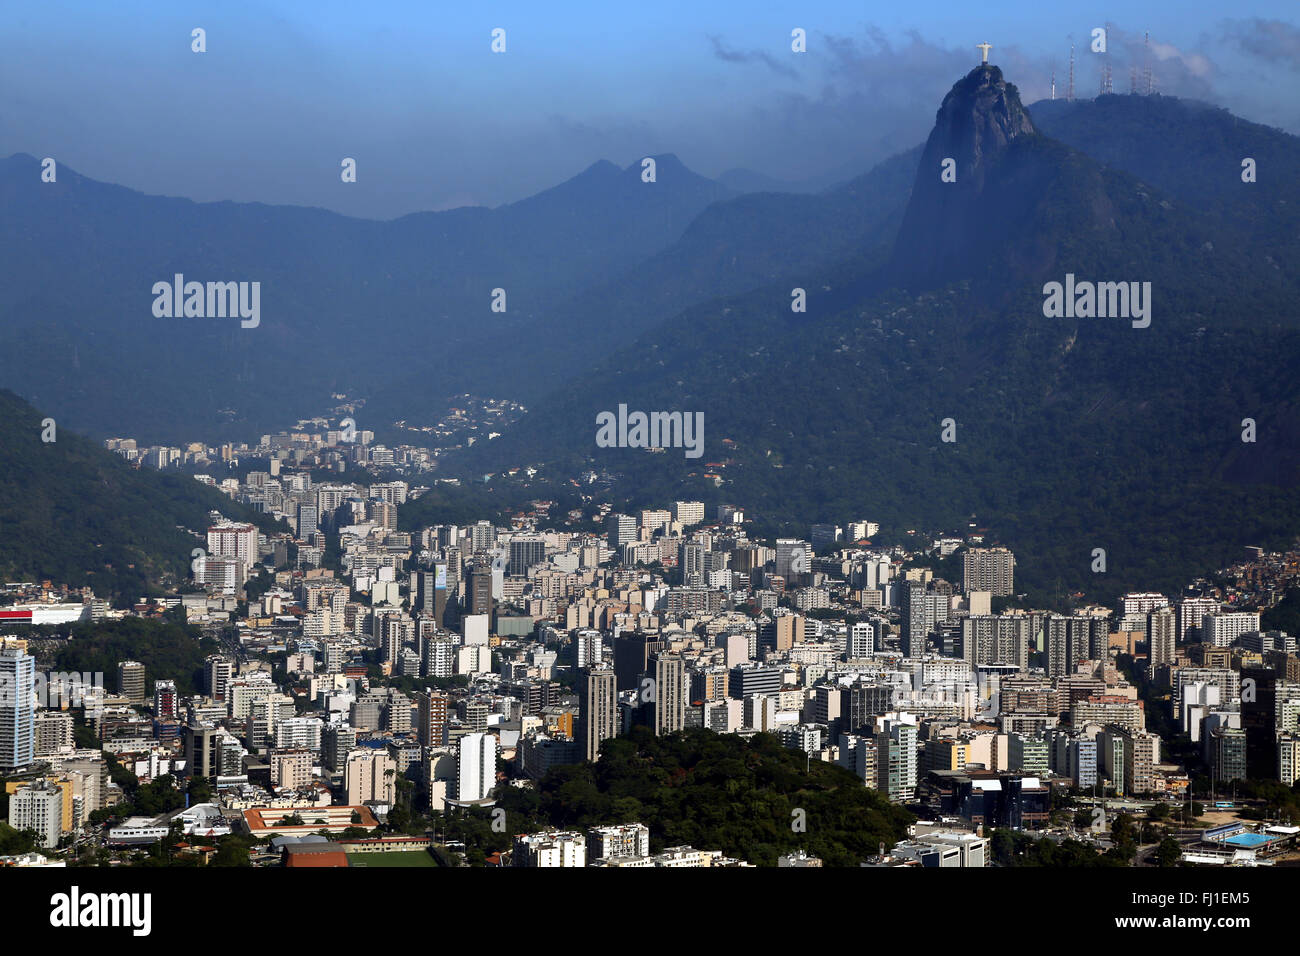 Landscape on Rio de Janeiro with Corcovado statue at the top of the mountain Stock Photo